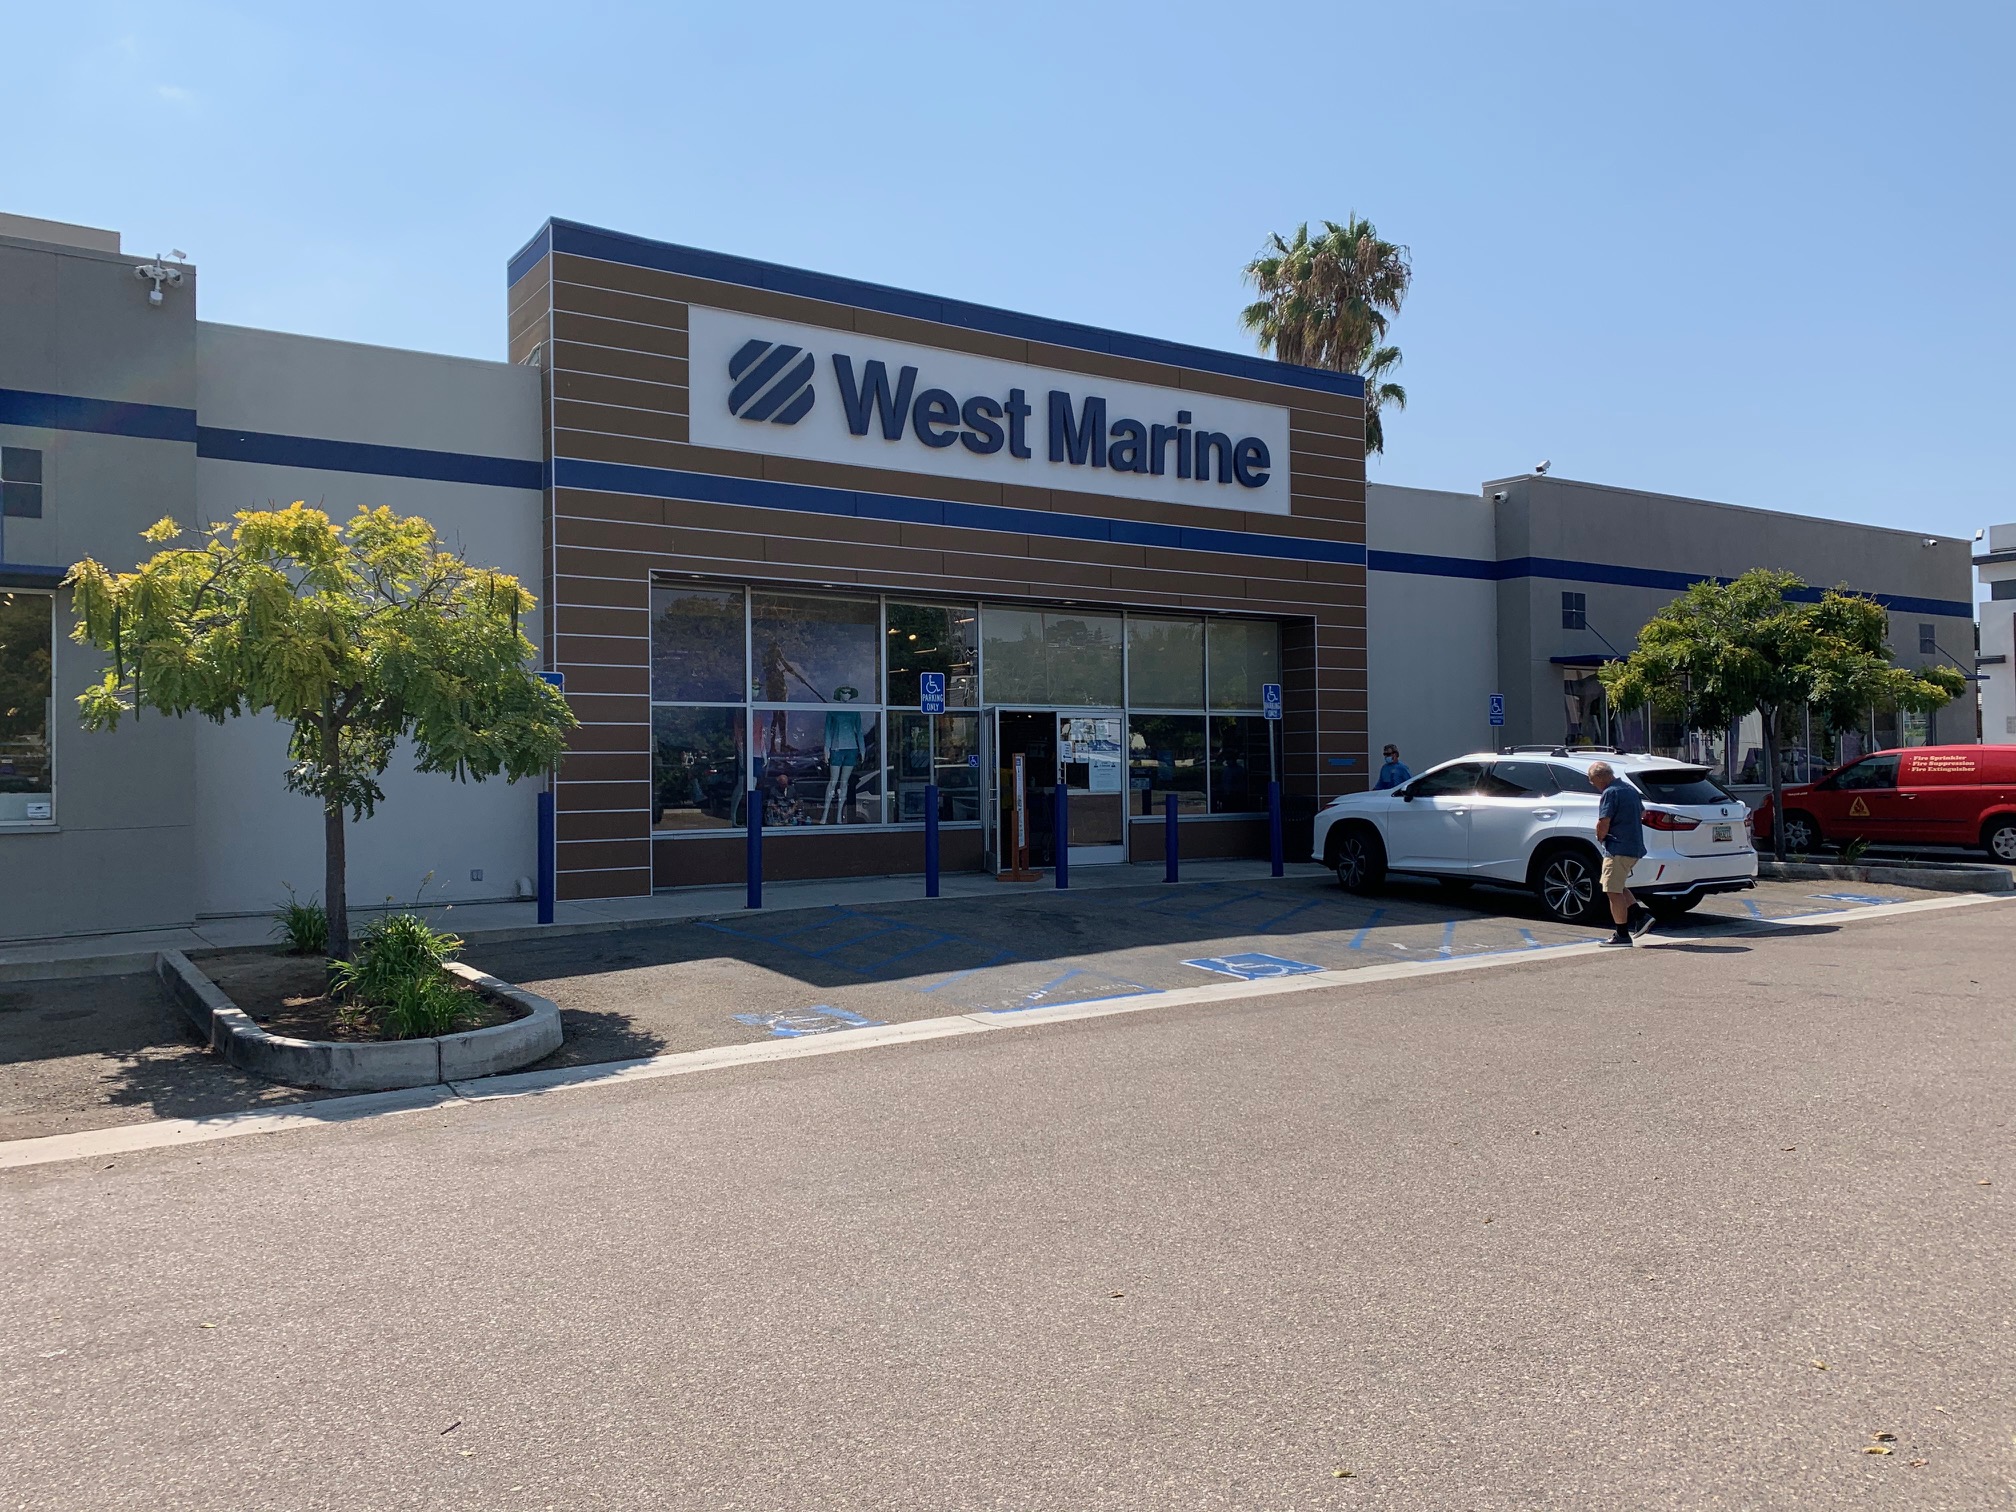 Boat Supplies, Fishing Gear & More - San Diego, CA 92106